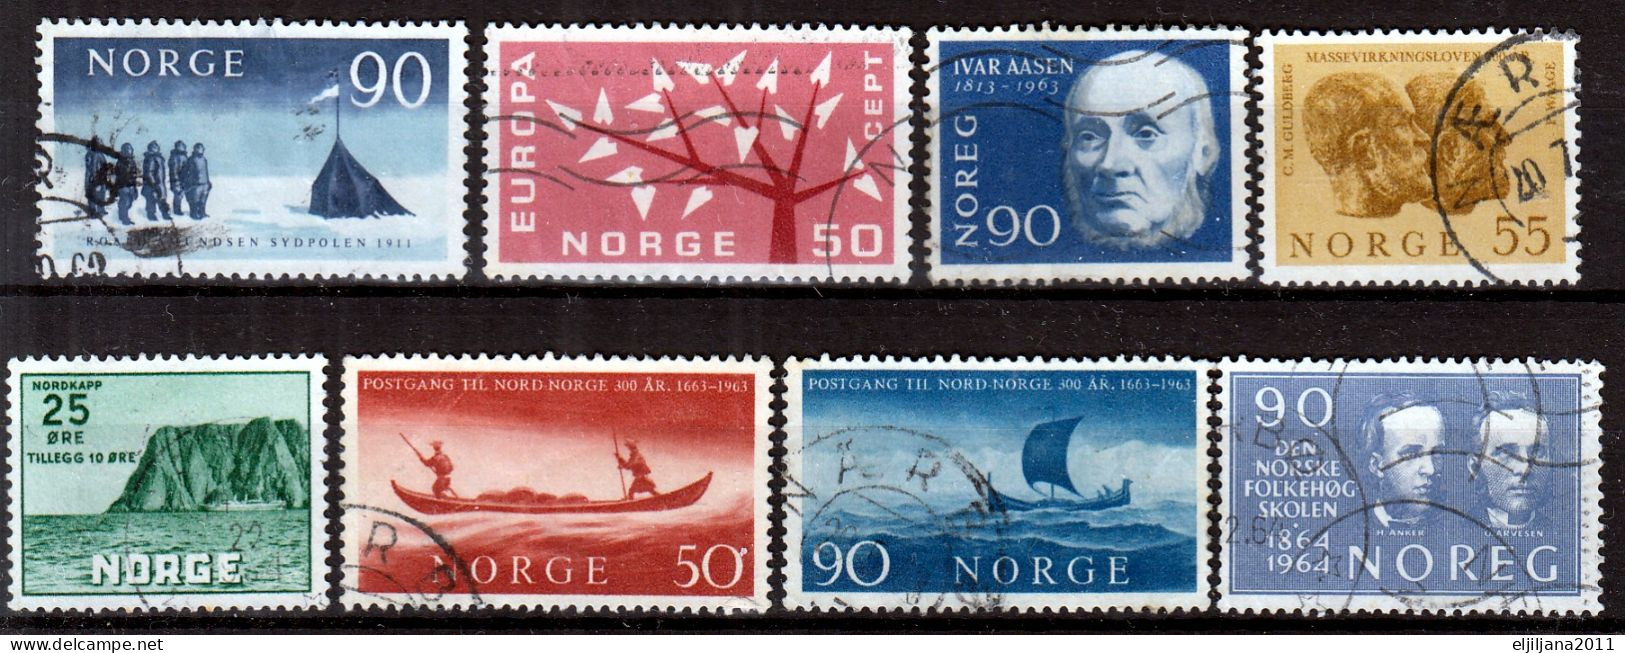 Action !! SALE !! 50 % OFF !! ⁕ Norway / NORGE 1938 - 1966 ⁕ Nice Collection / Lot ⁕ 32v Used - See Scan - Collections